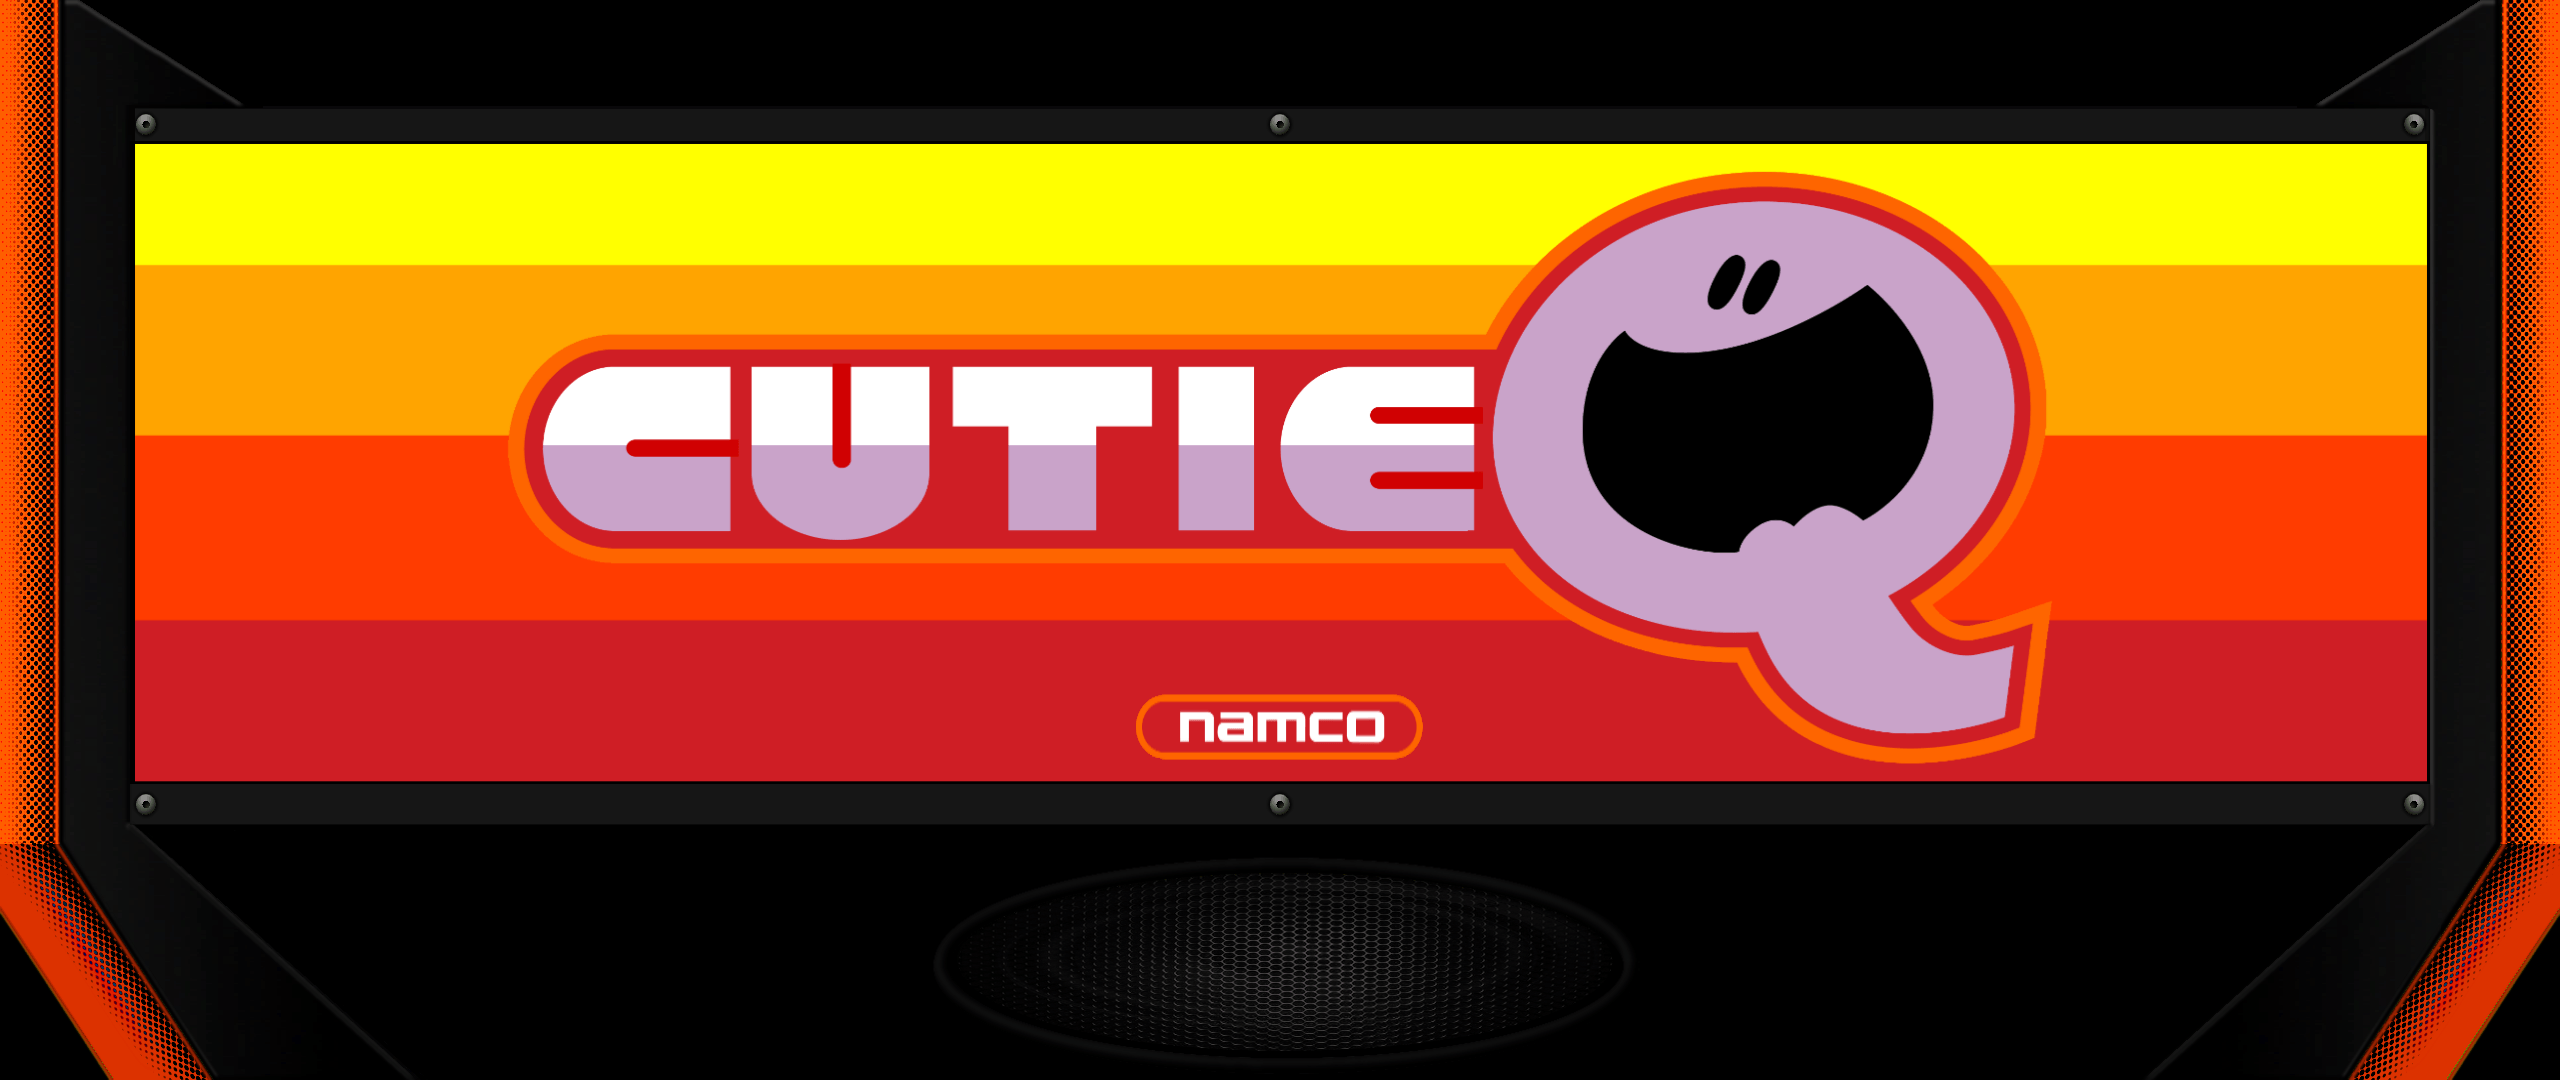 Cutie Q Logo - Krakerman's GameRoom XPerience! Project - Page 4 - Game Media ...